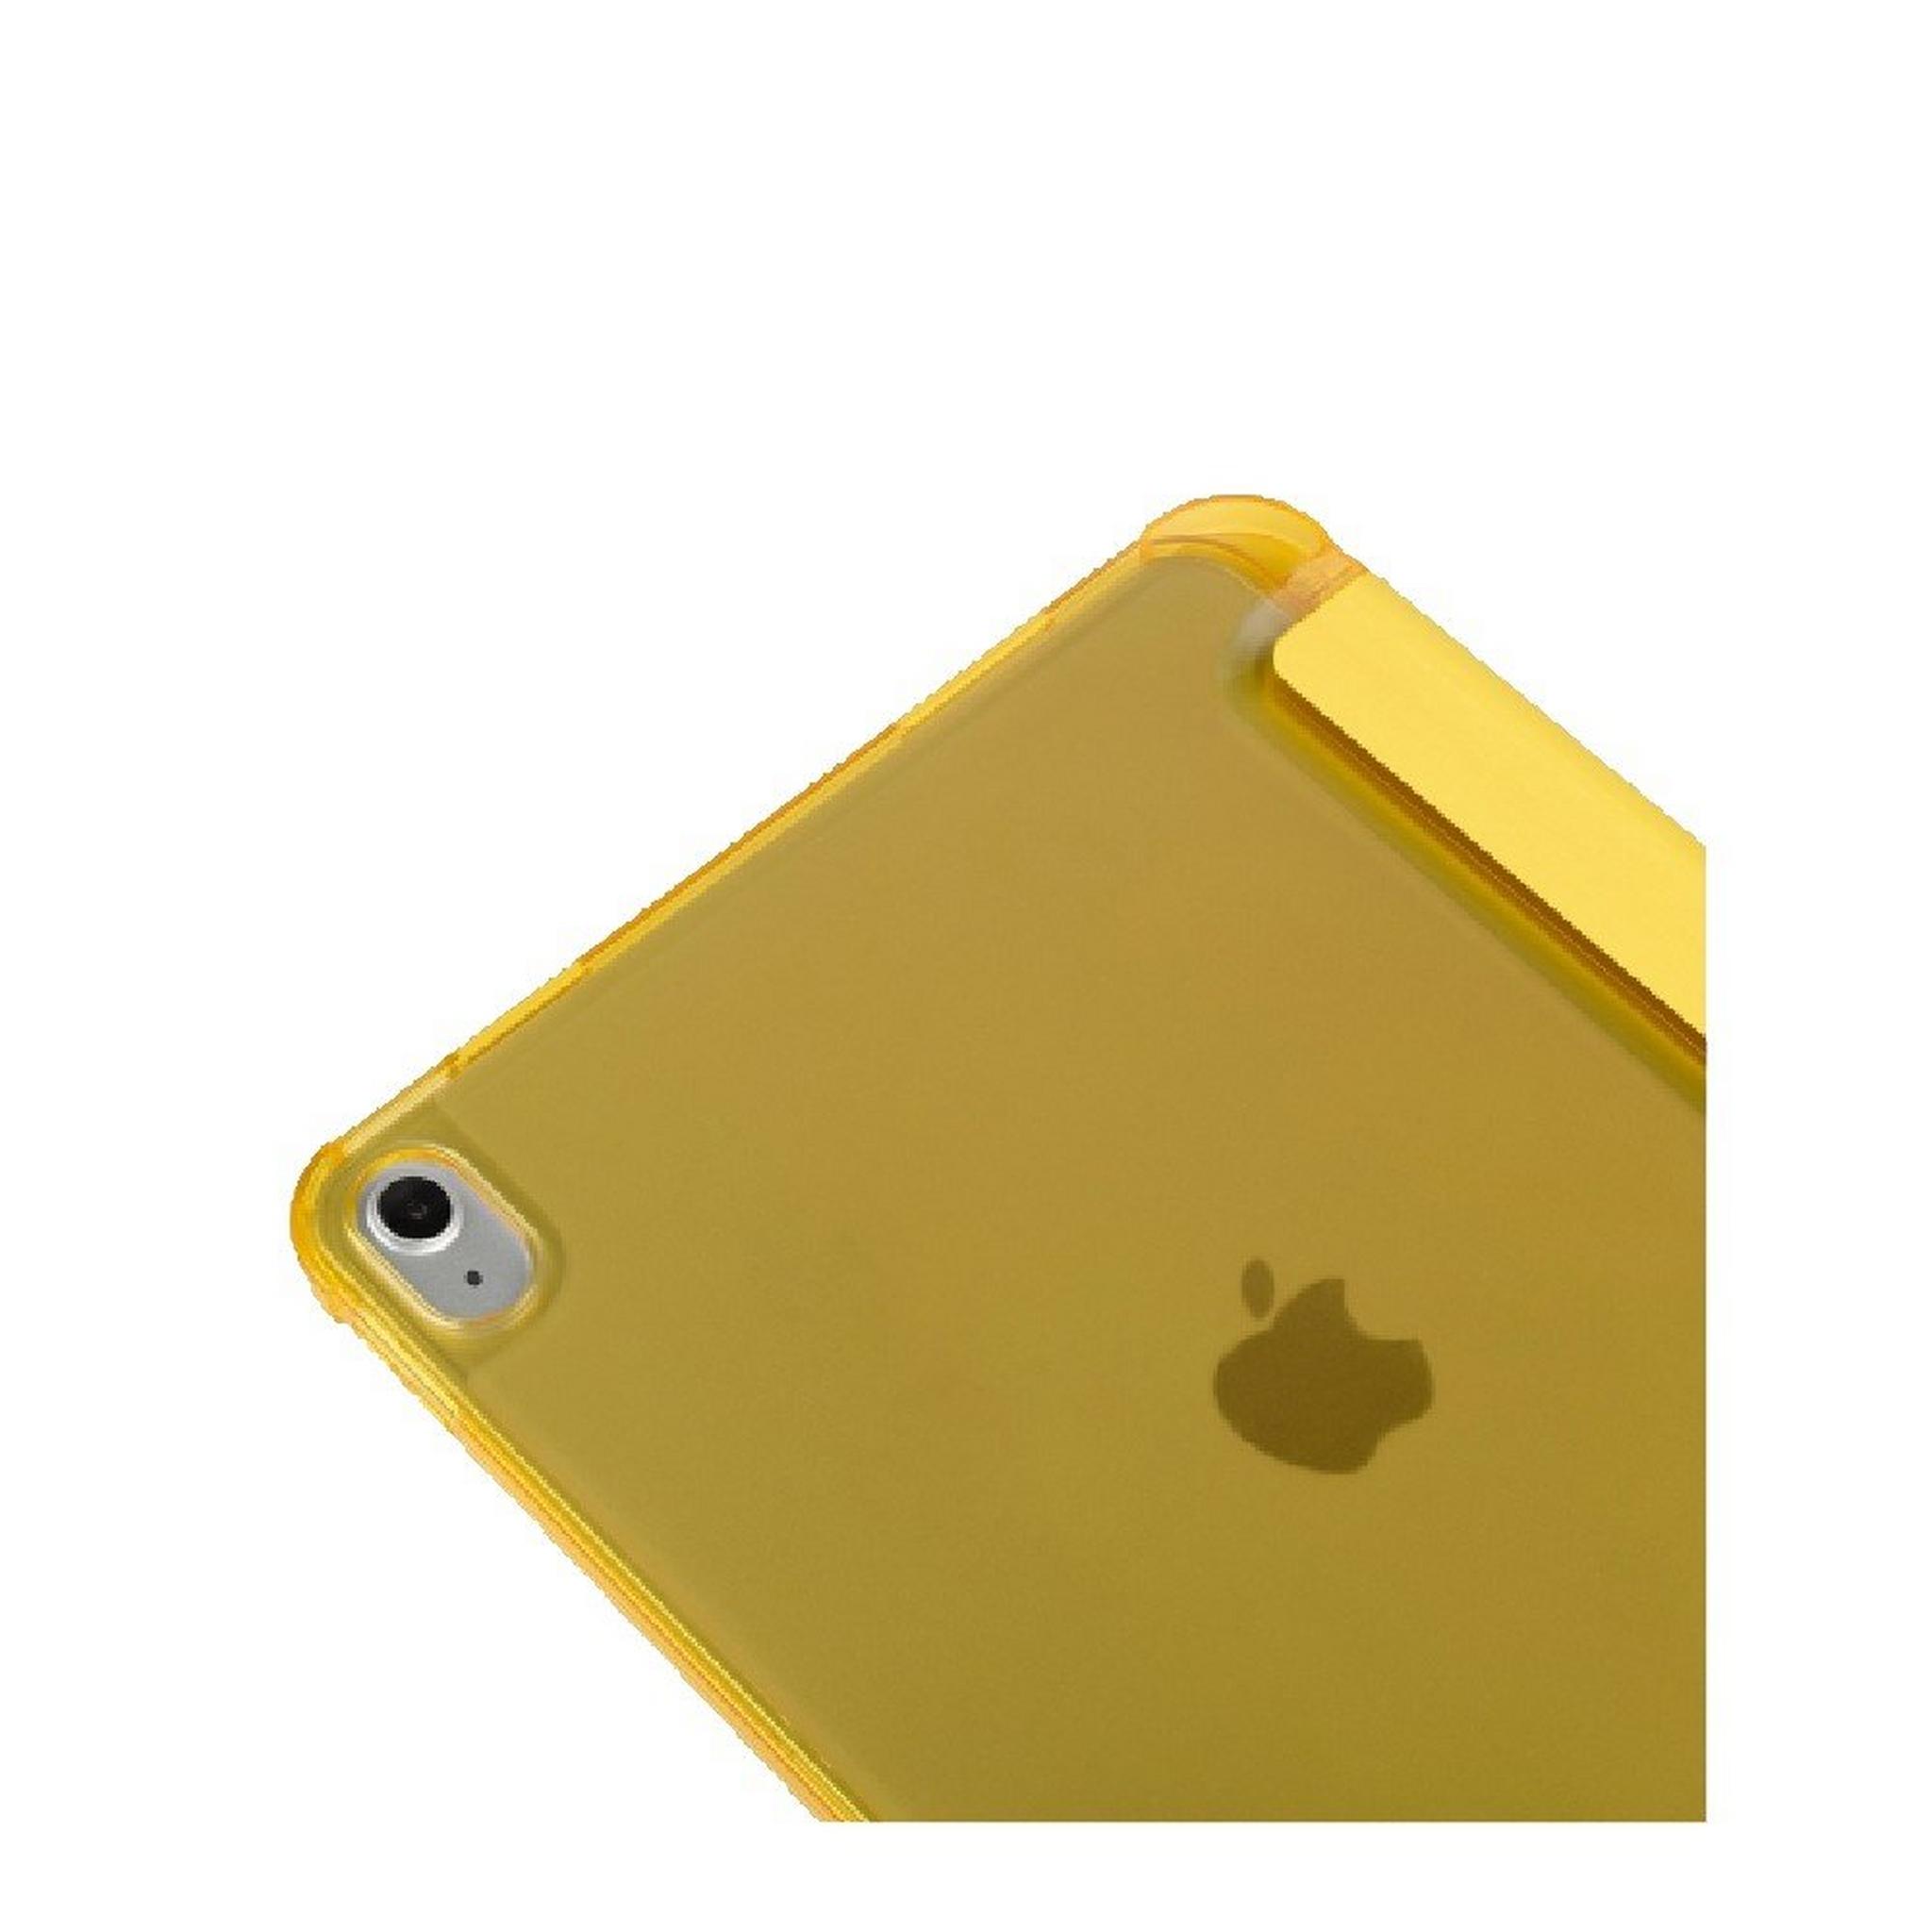 Tucano Stain Case for iPad 10th Gen, 10.9-inch, IPD1022ST-Y – Yellow